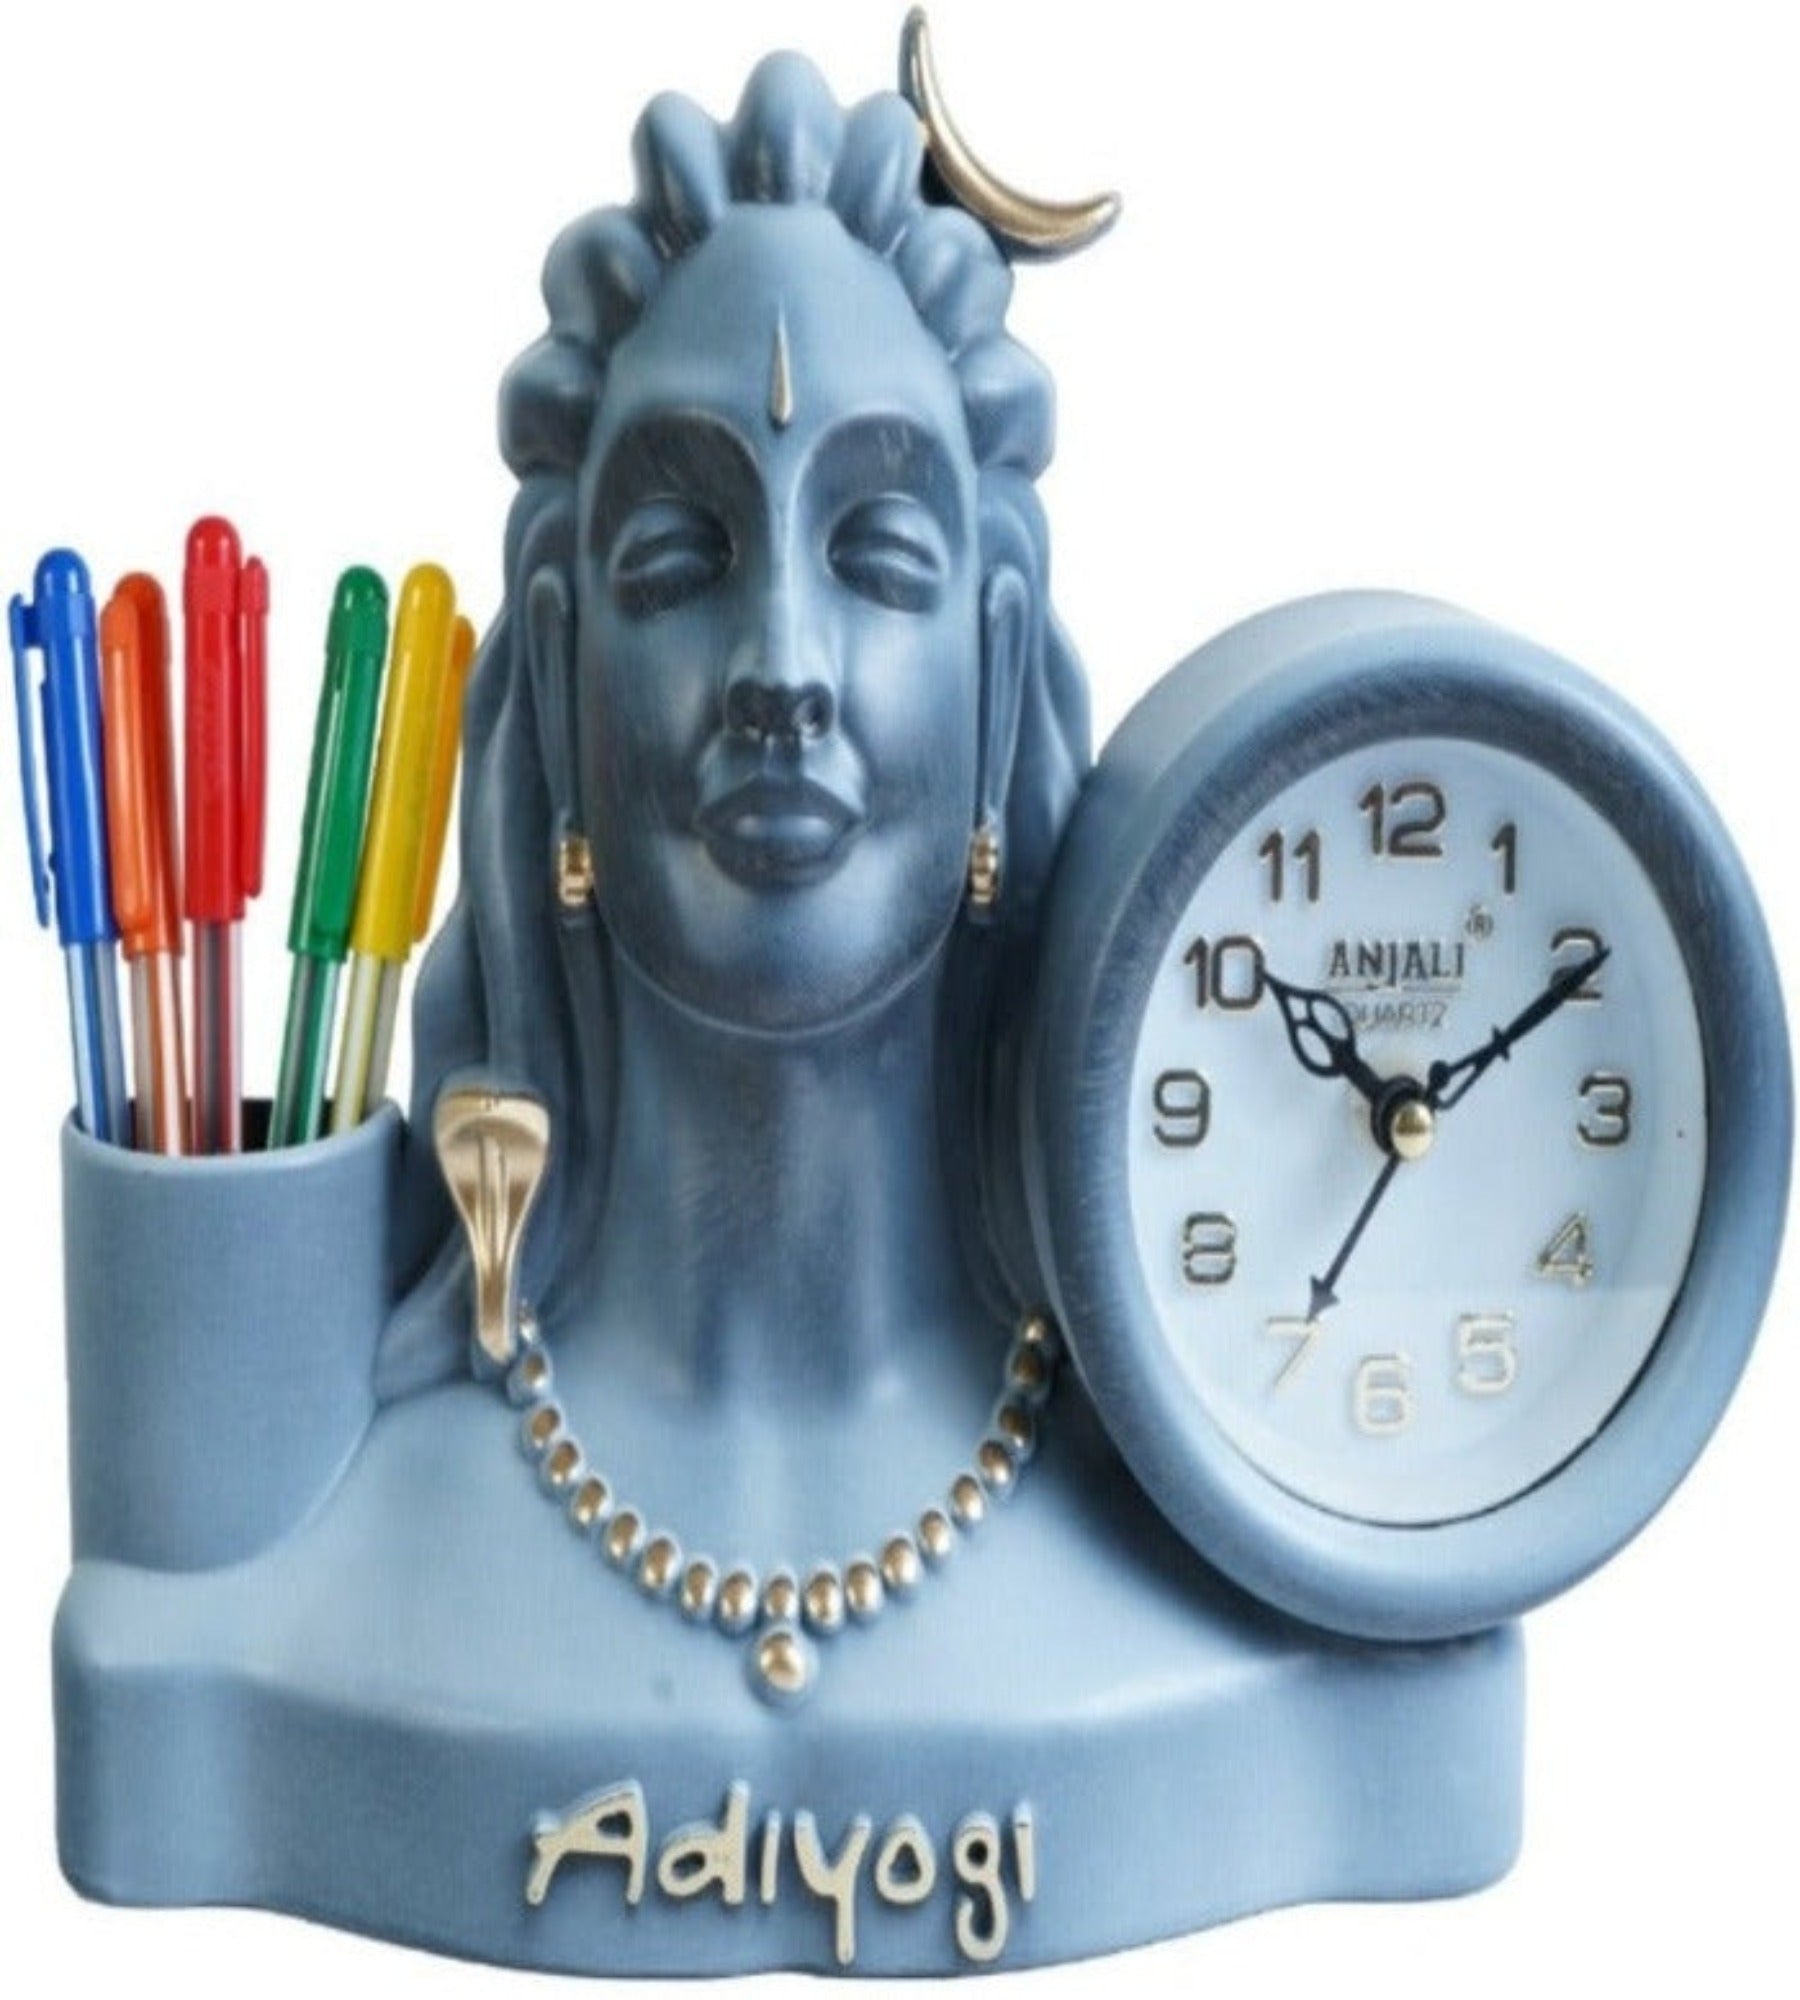 25x20 Cm Adiyogi Table Clock With Penstand For Home Office College K4193